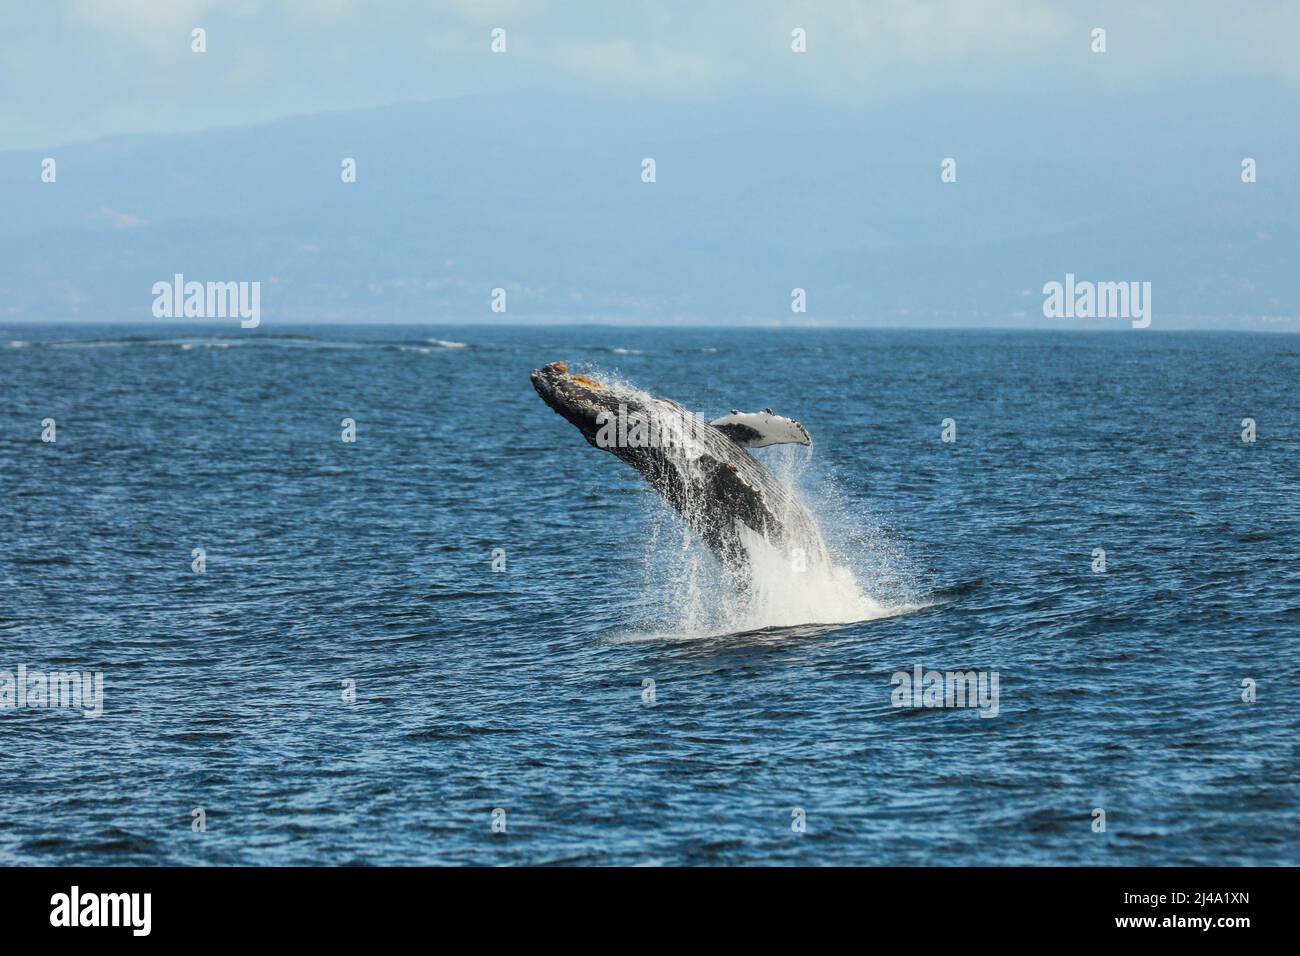 Hump Whale breaching the water, Monterey Bay, CA, Pacific Ocean - Earth Day. Stock Photo